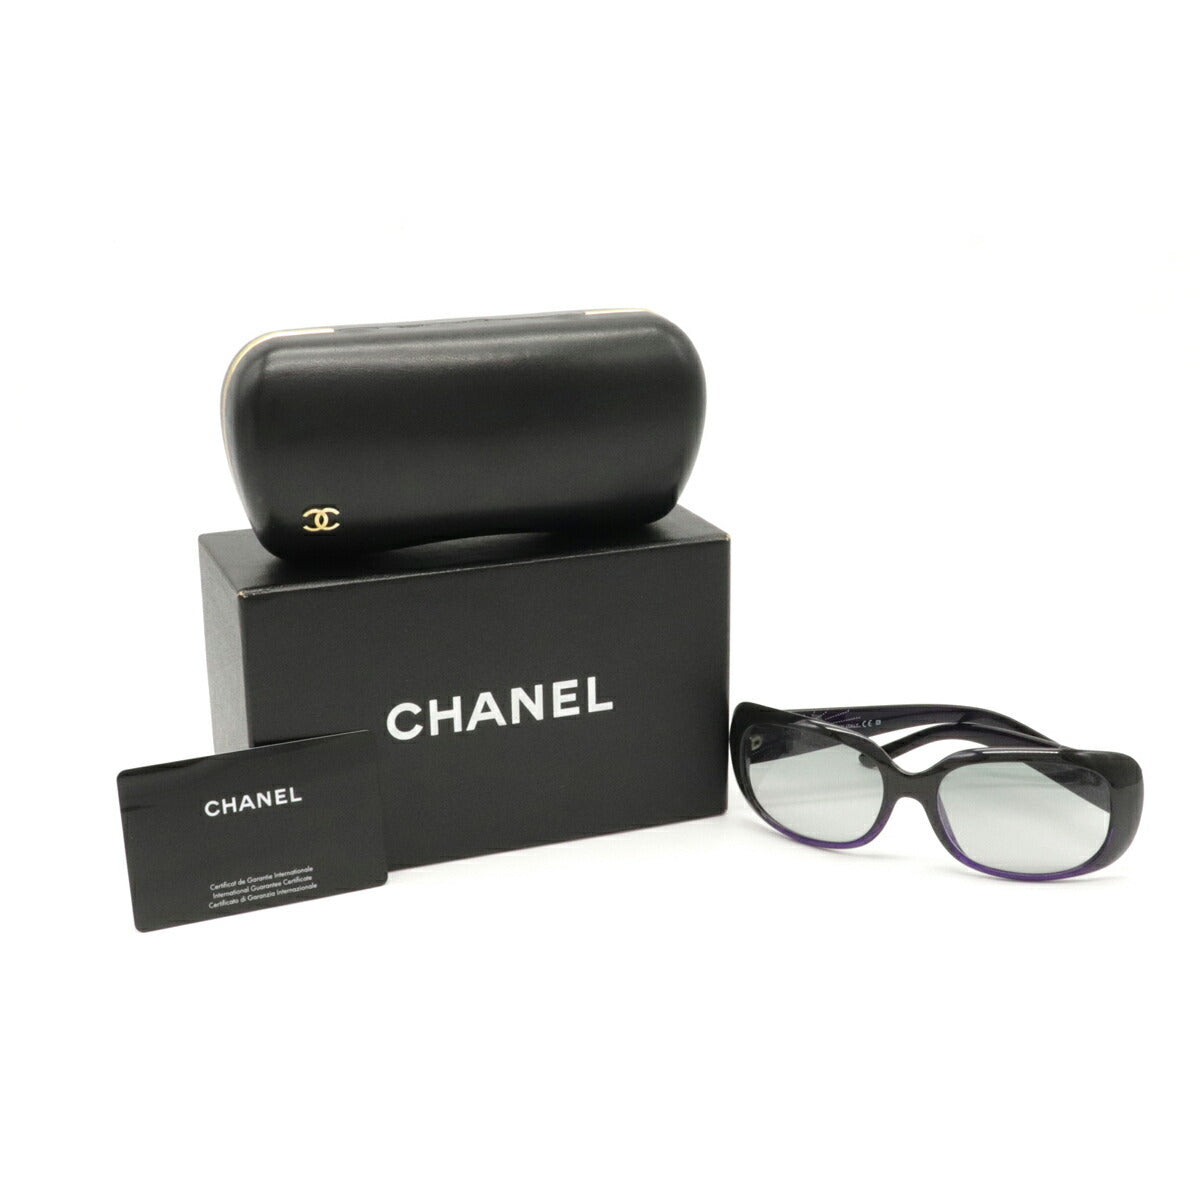 Chanel - Authenticated Sunglasses - Metal Black for Women, Good Condition